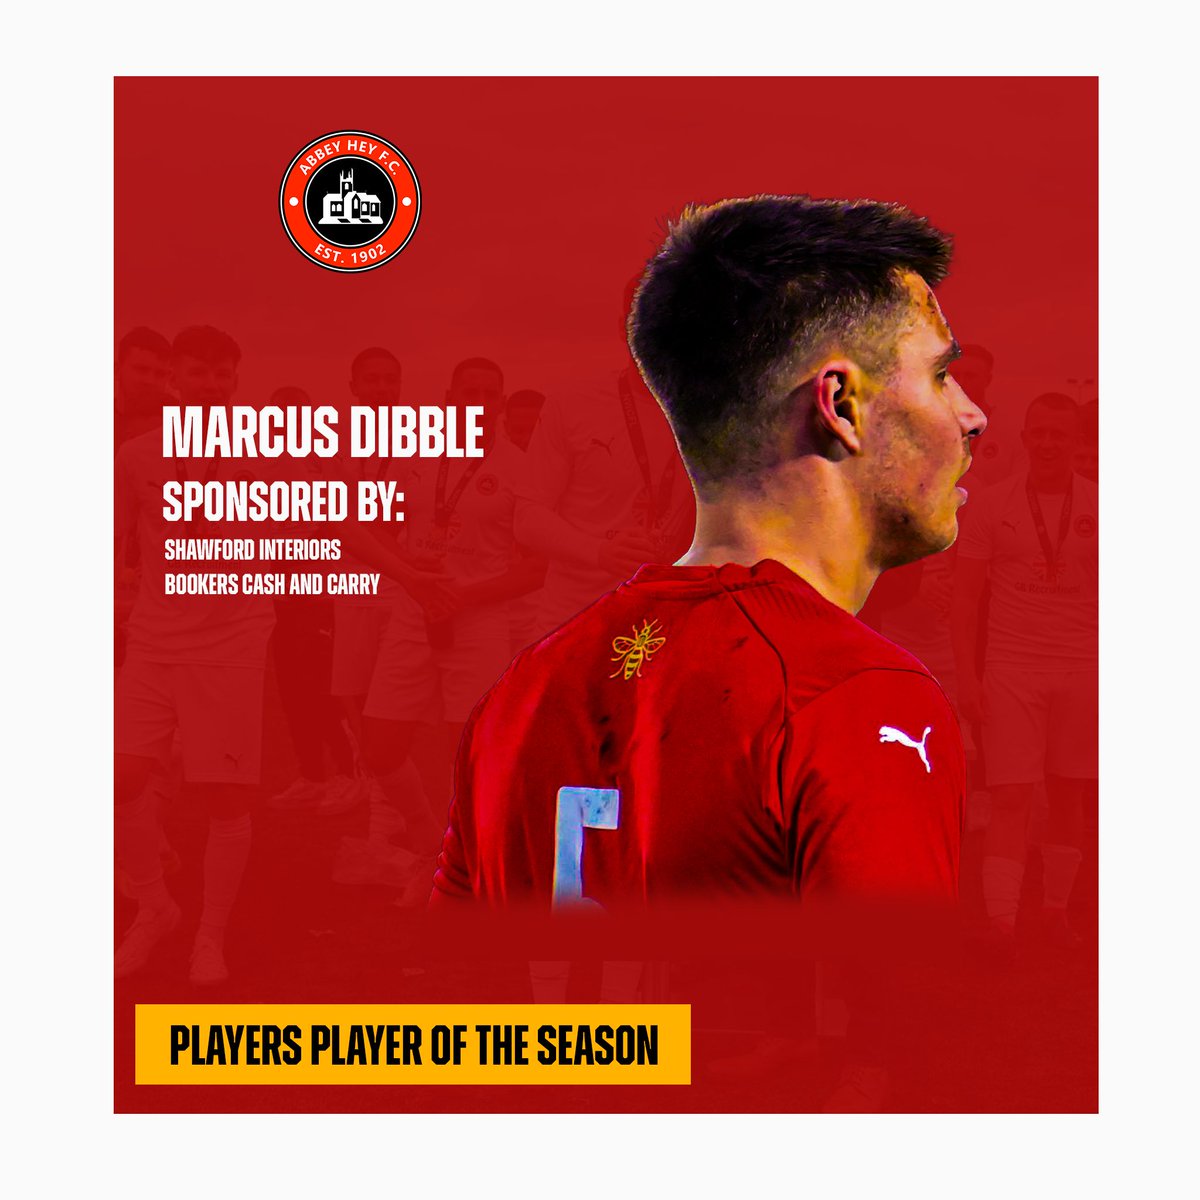 Abbey Hey's Player's Player Of The Season 👏 Congrats Marcus Dibble #uptheabbey